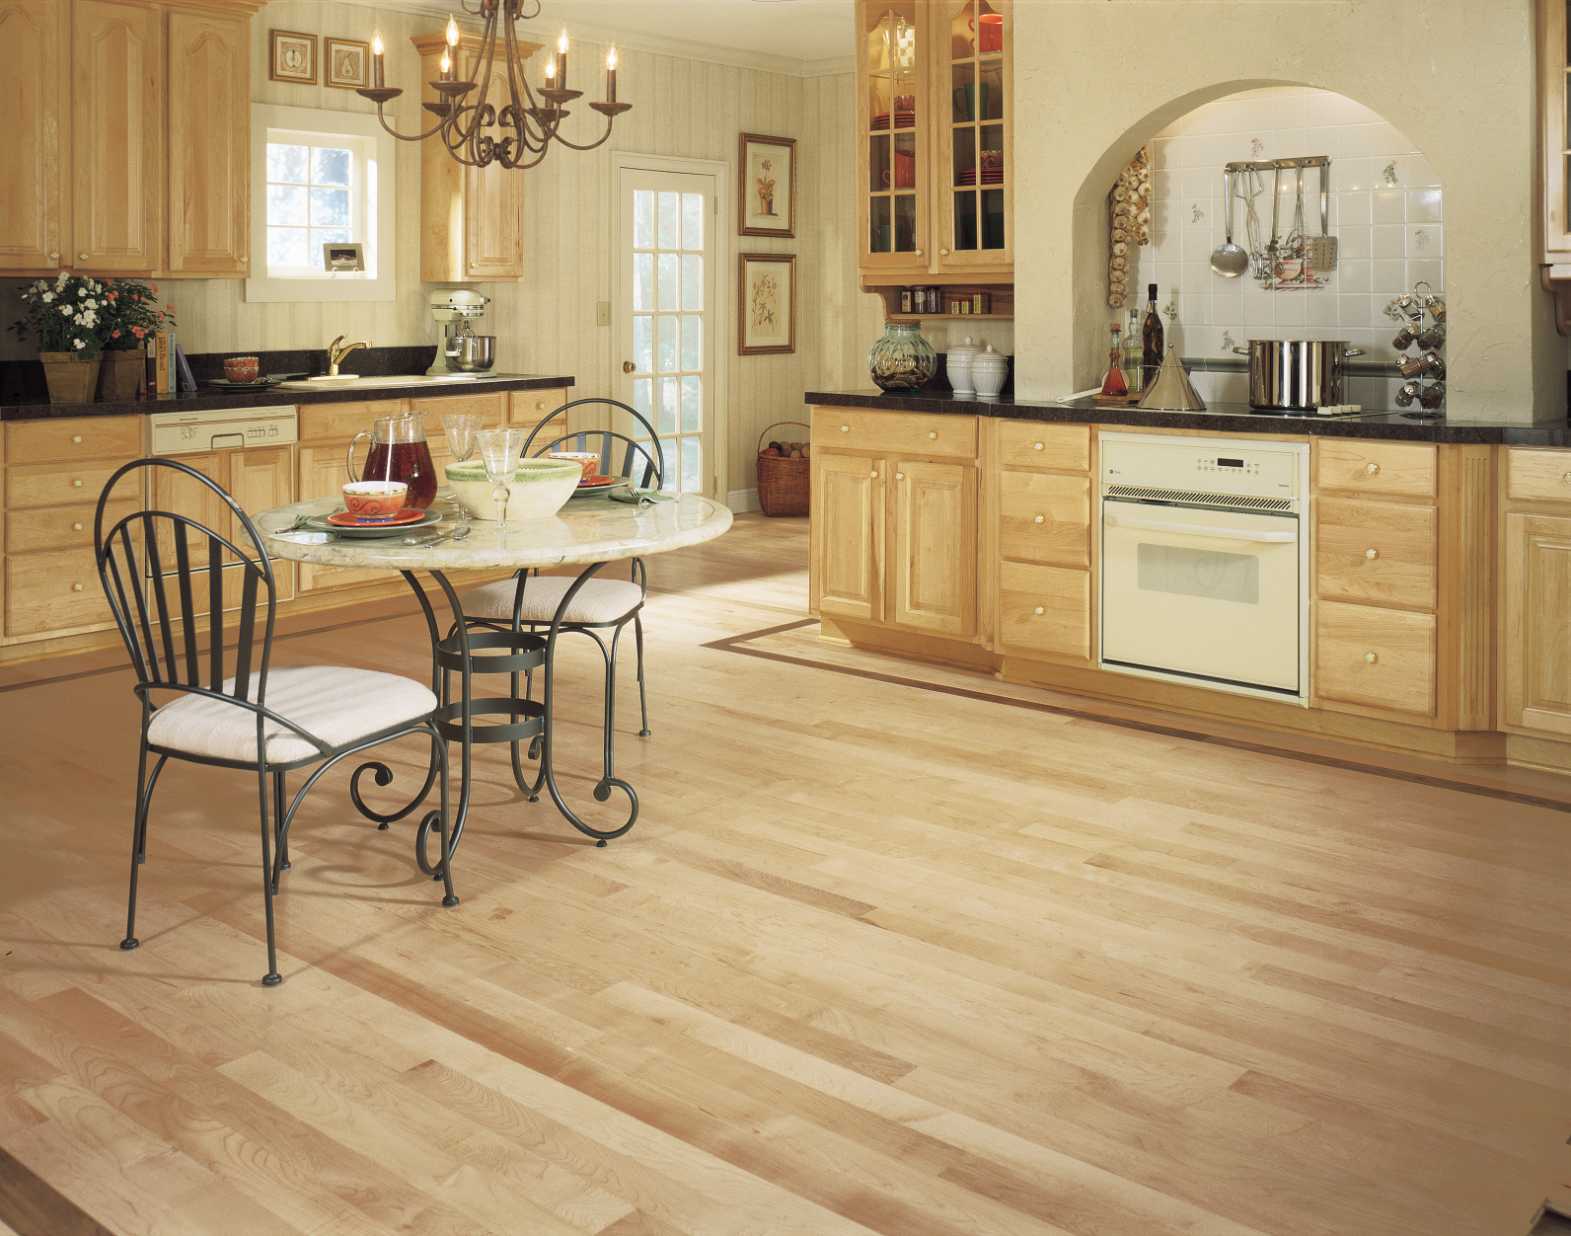 Photo gallery 4 advantages of uncoated laminate flooring A picture of parquet A picture of flooring design A picture of the flooring Picture of the flooring Pictures of bamboo flooring Pictures of cork flooring Picture of parquet flooring Picture of laminate flooring